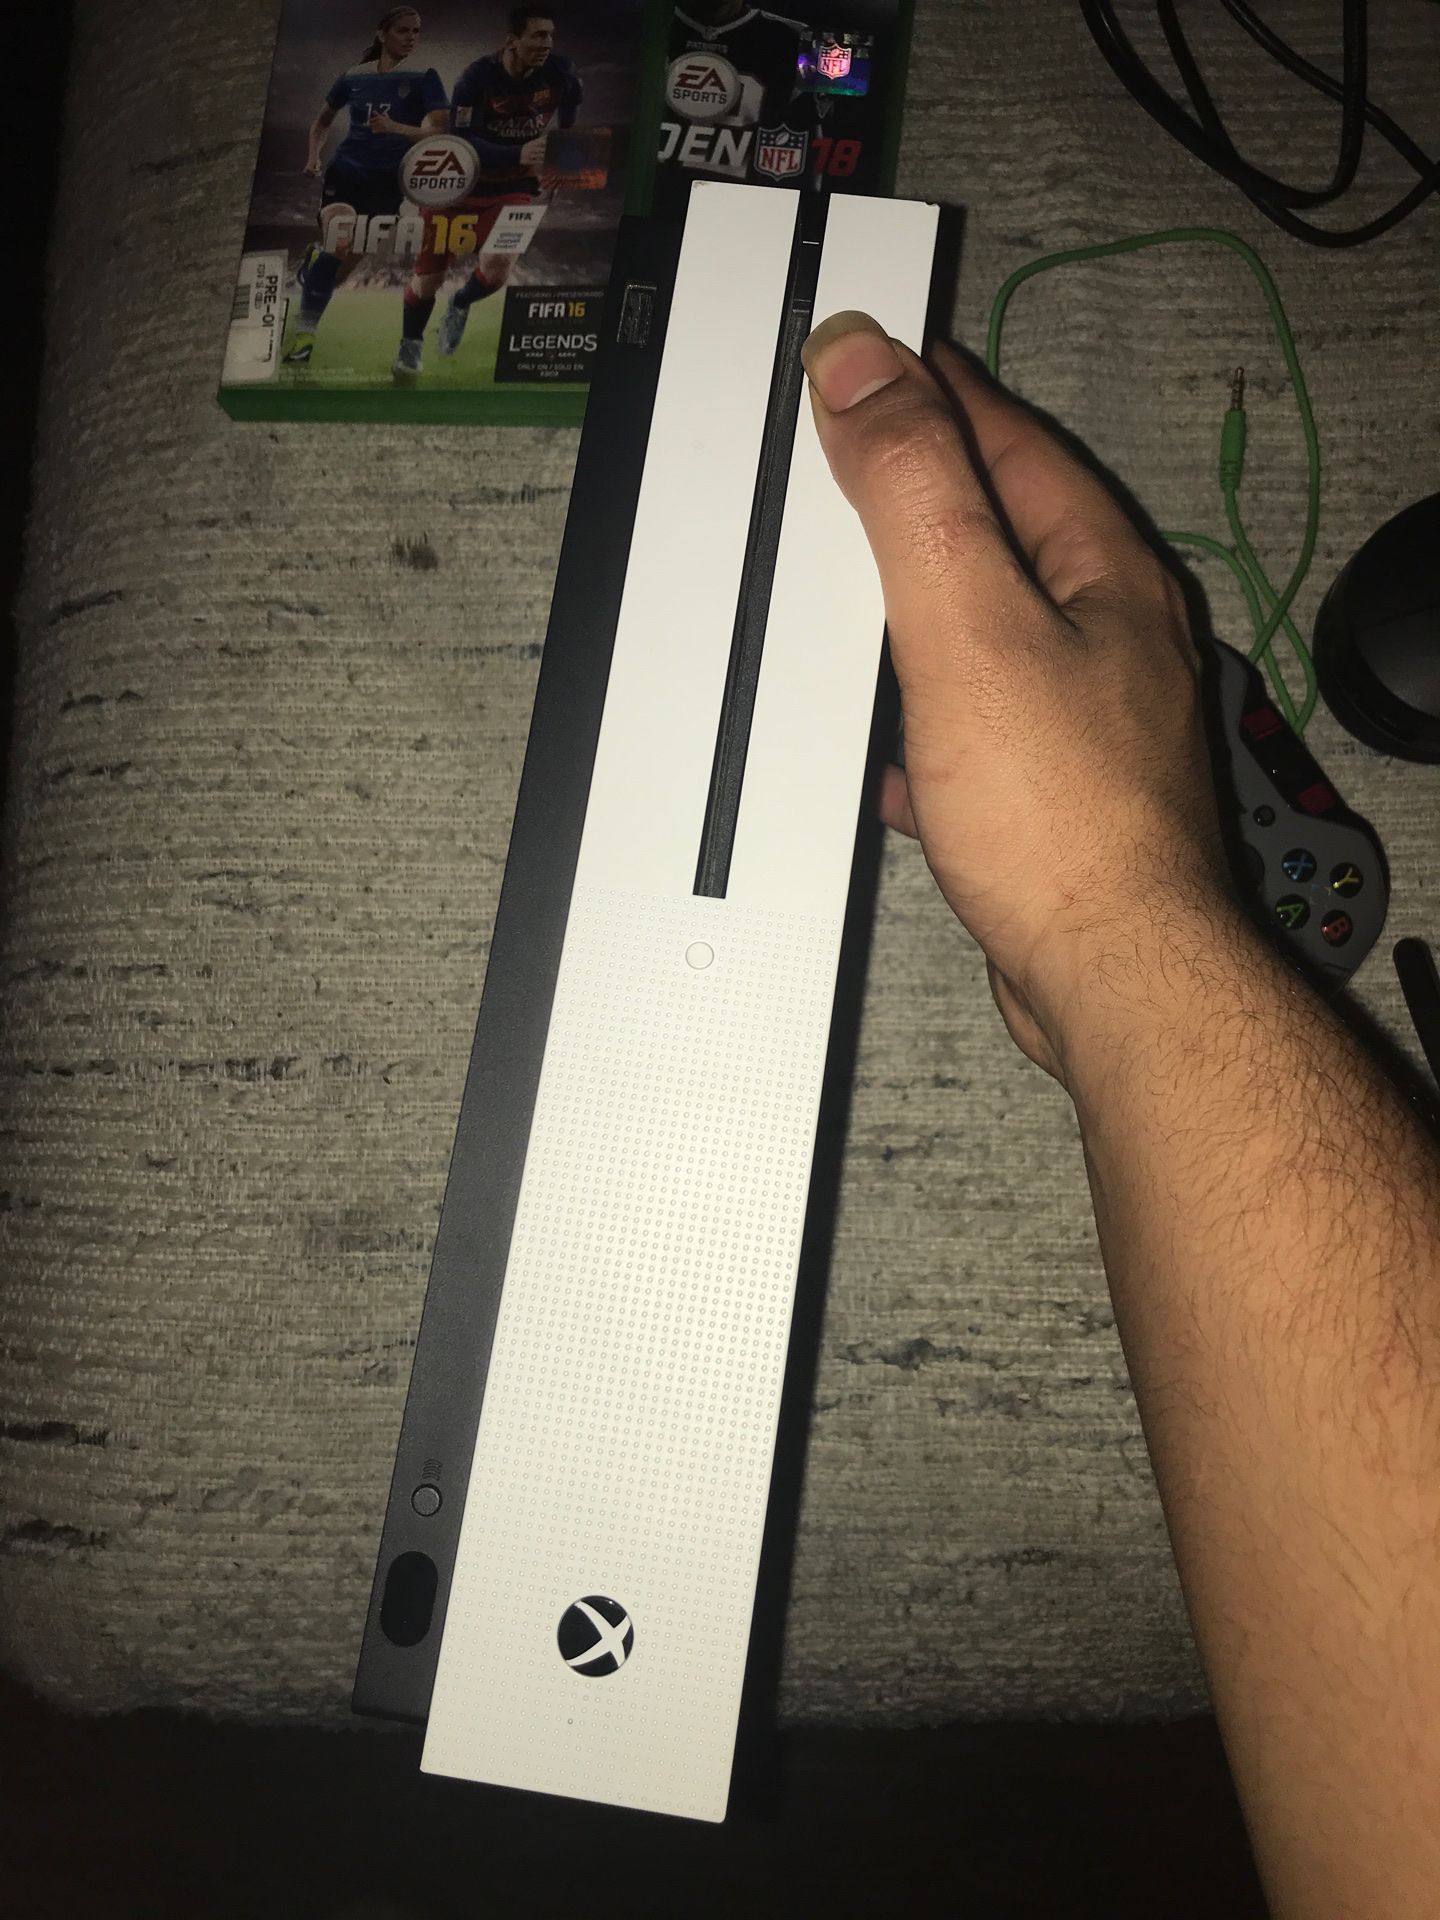 Xbox One S with 2 Free Games and 2 Controllers plus Turtle Beach Headsets